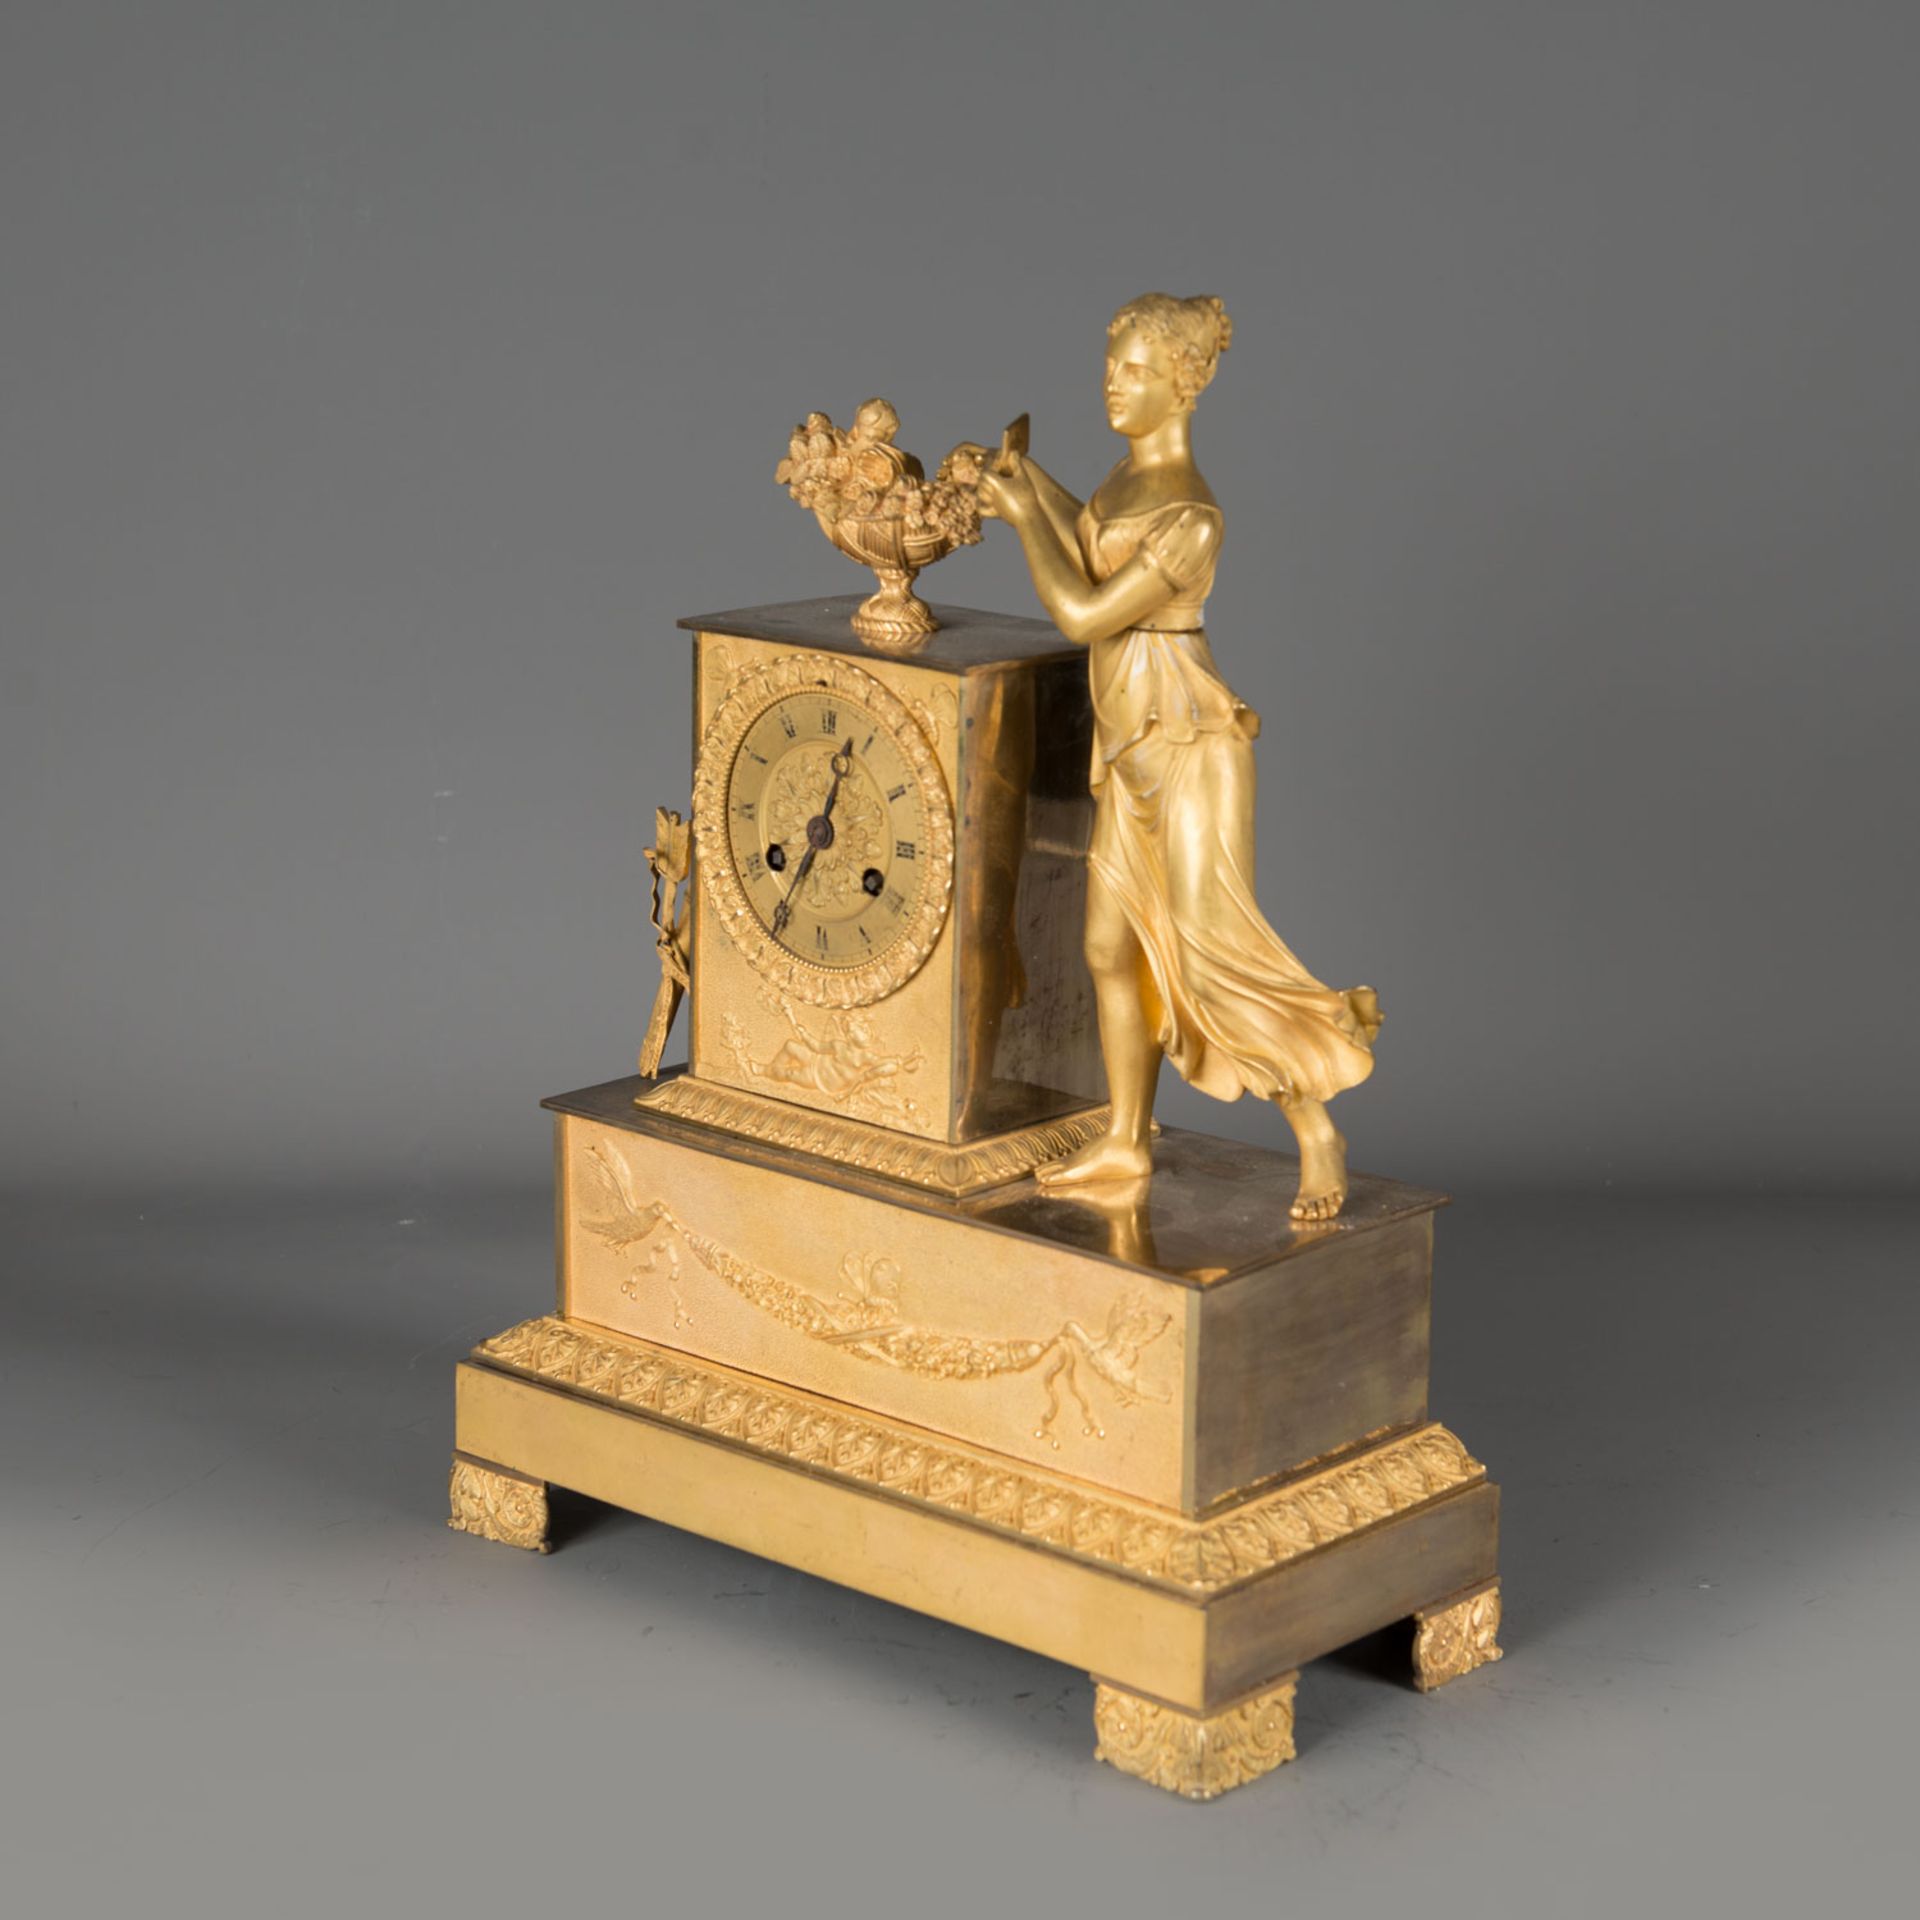 French Empire Clock - Image 2 of 3